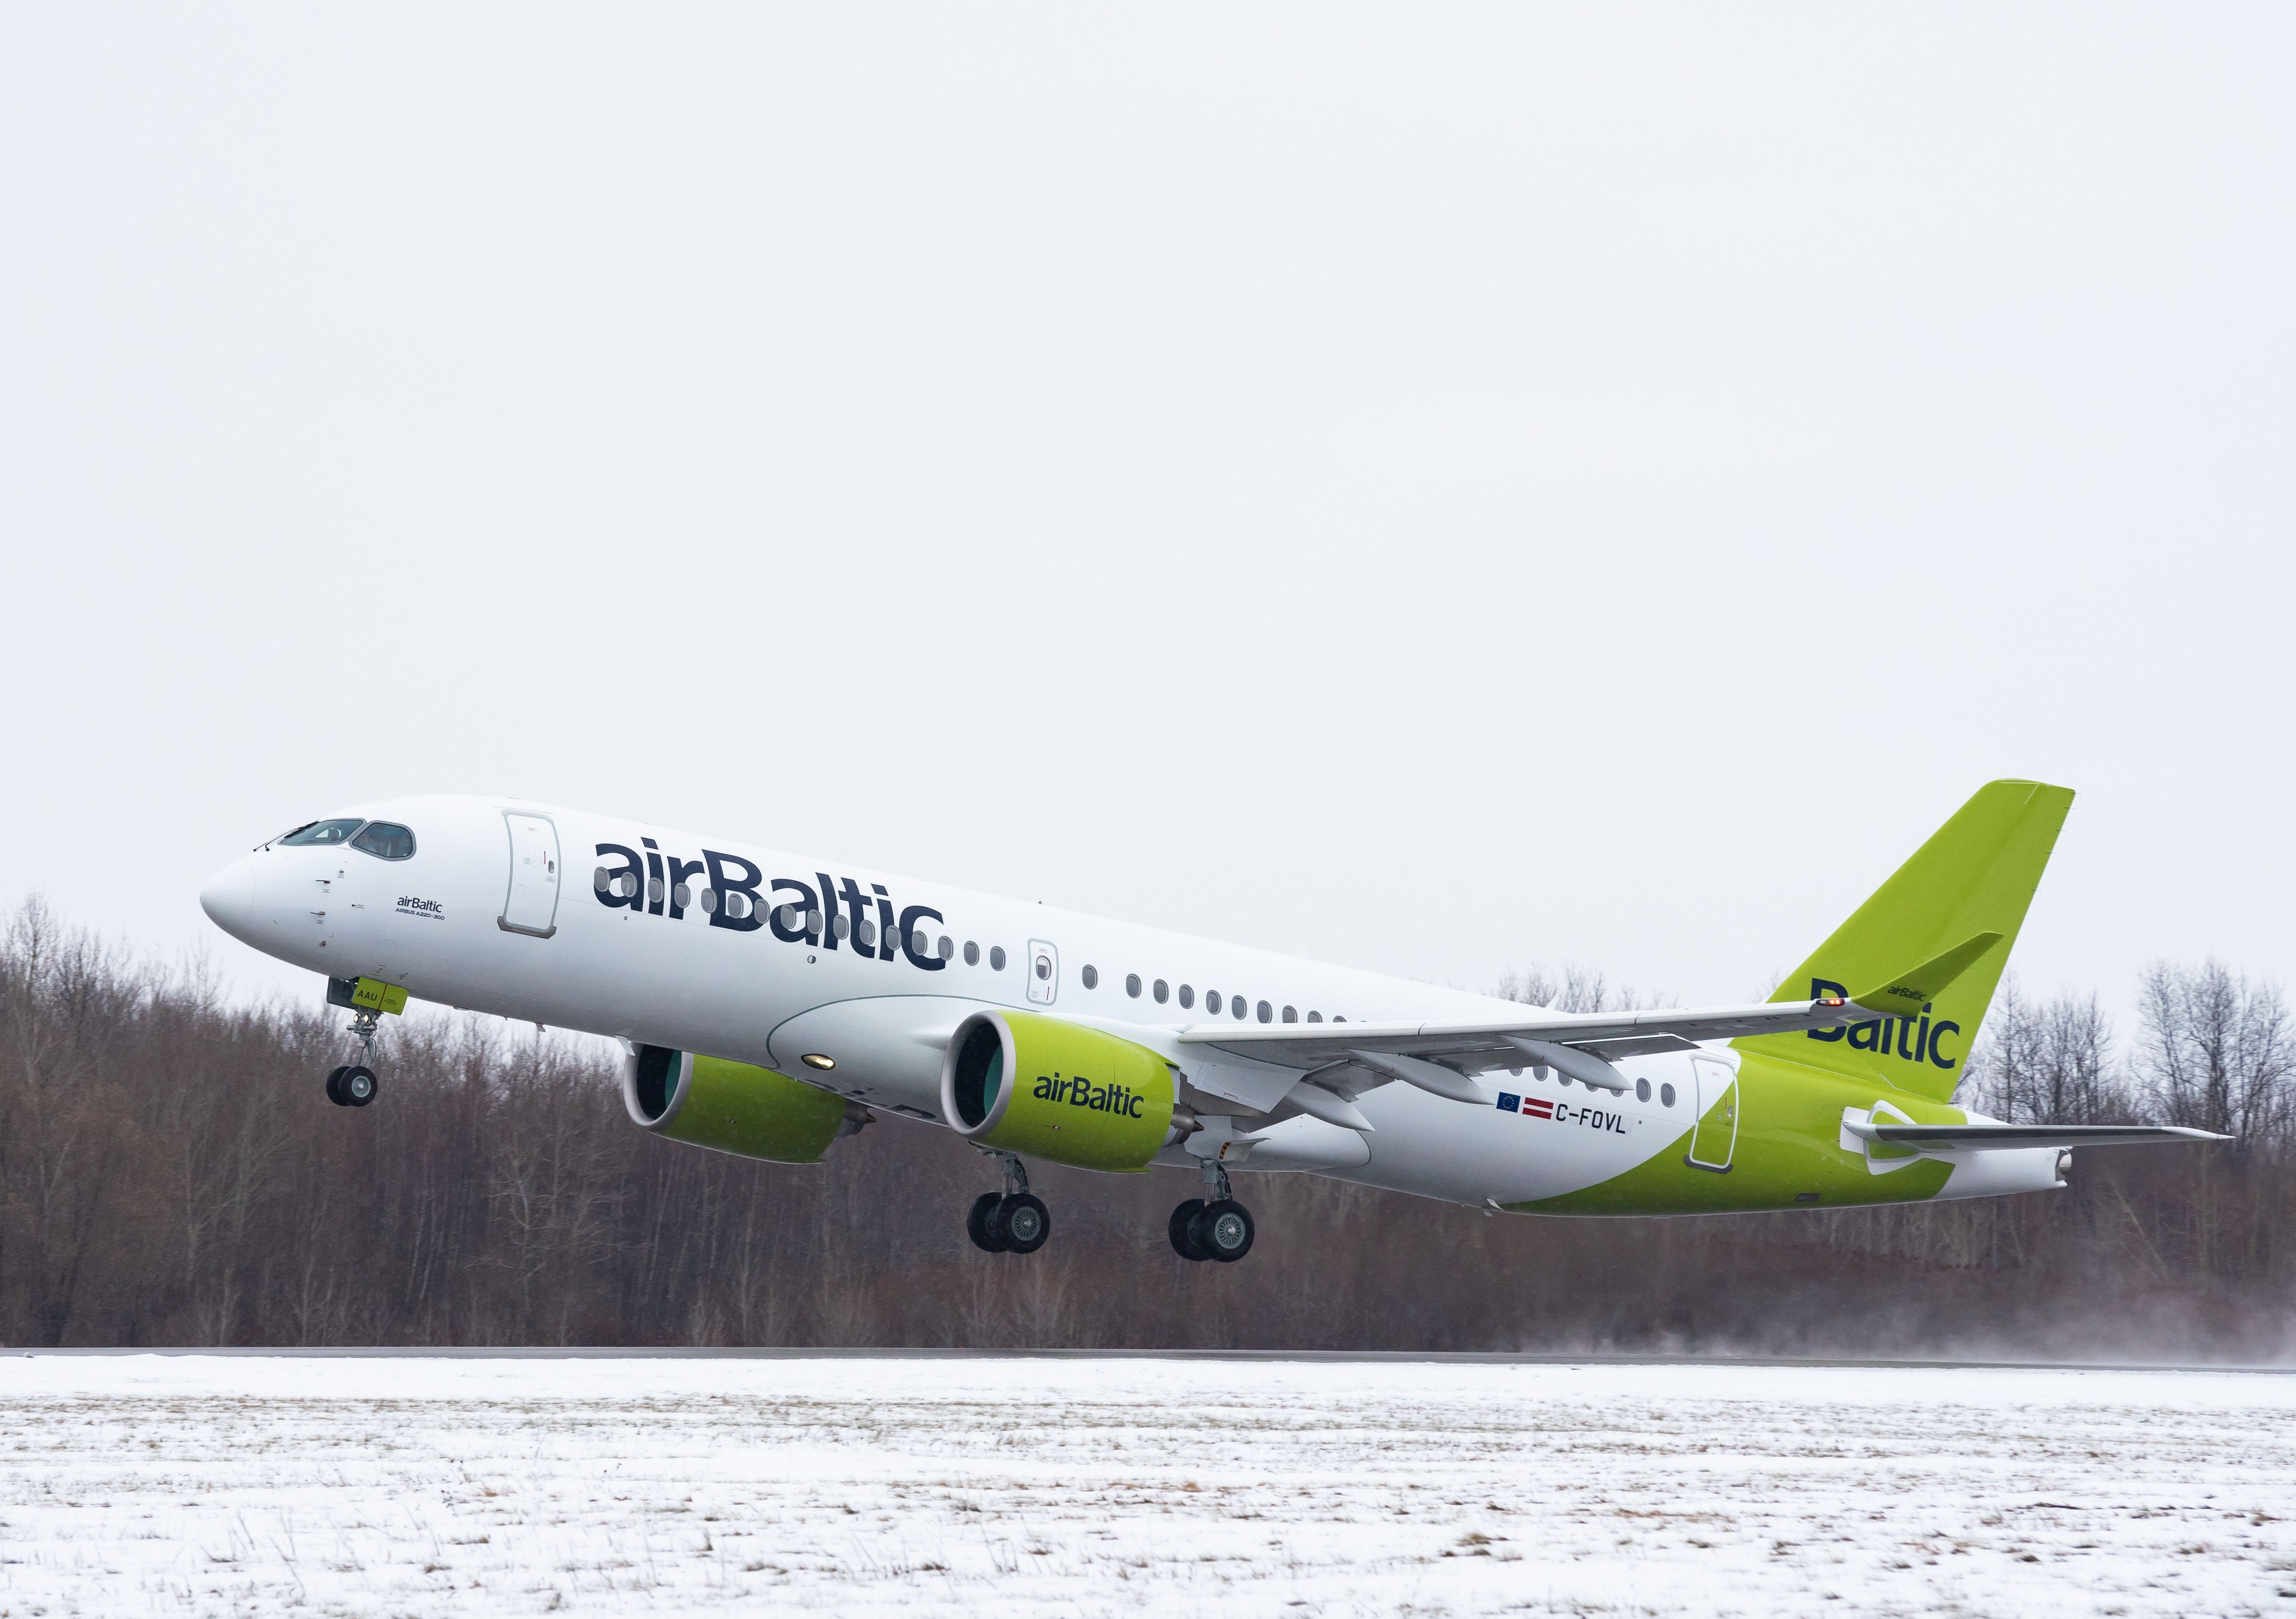 Takeoff of milestone airBaltic A220